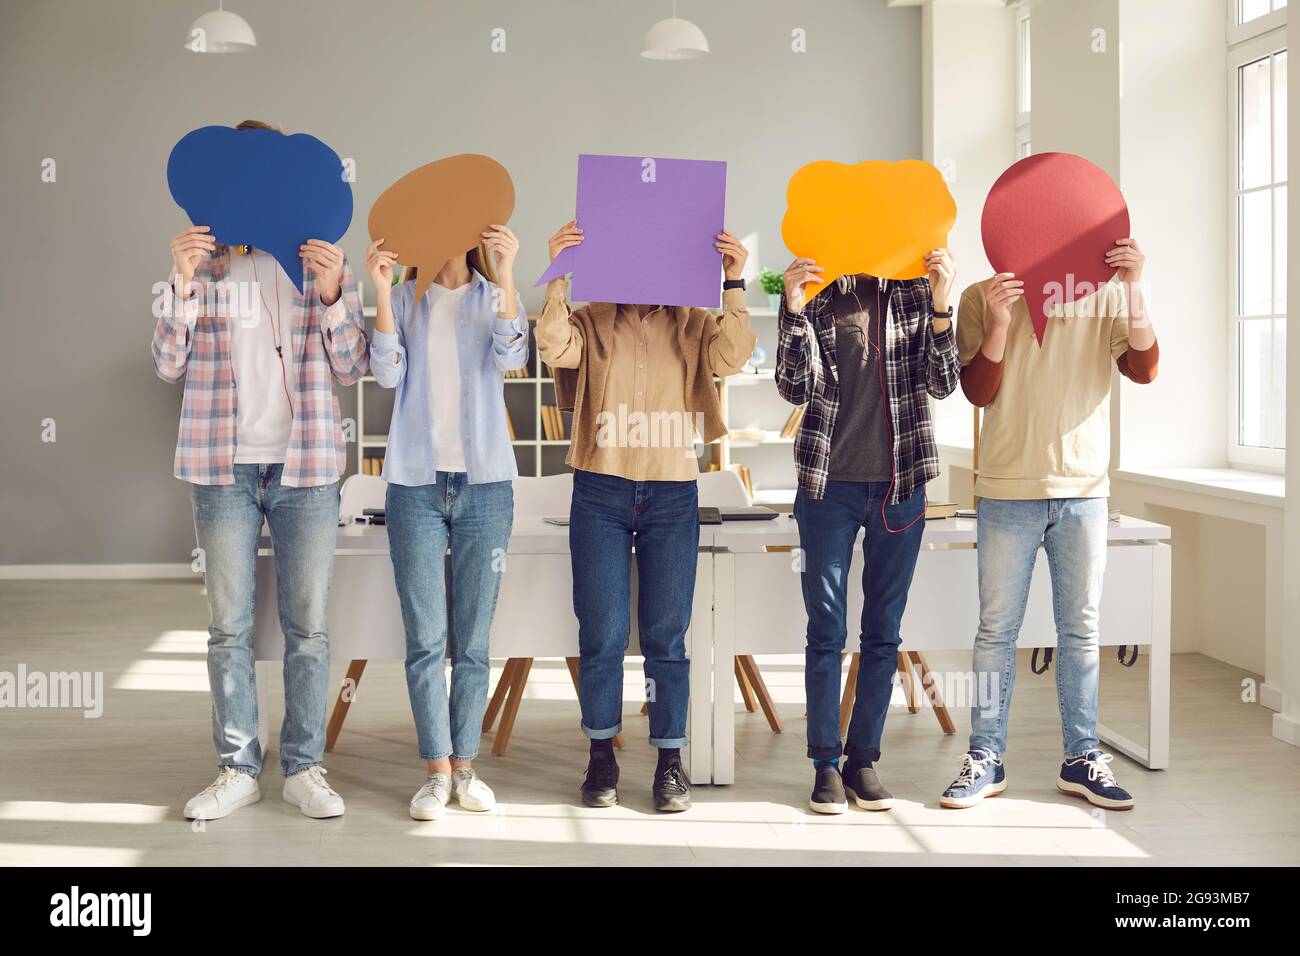 Group of college students covering faces with colorful paper mockup speech bubbles Stock Photo